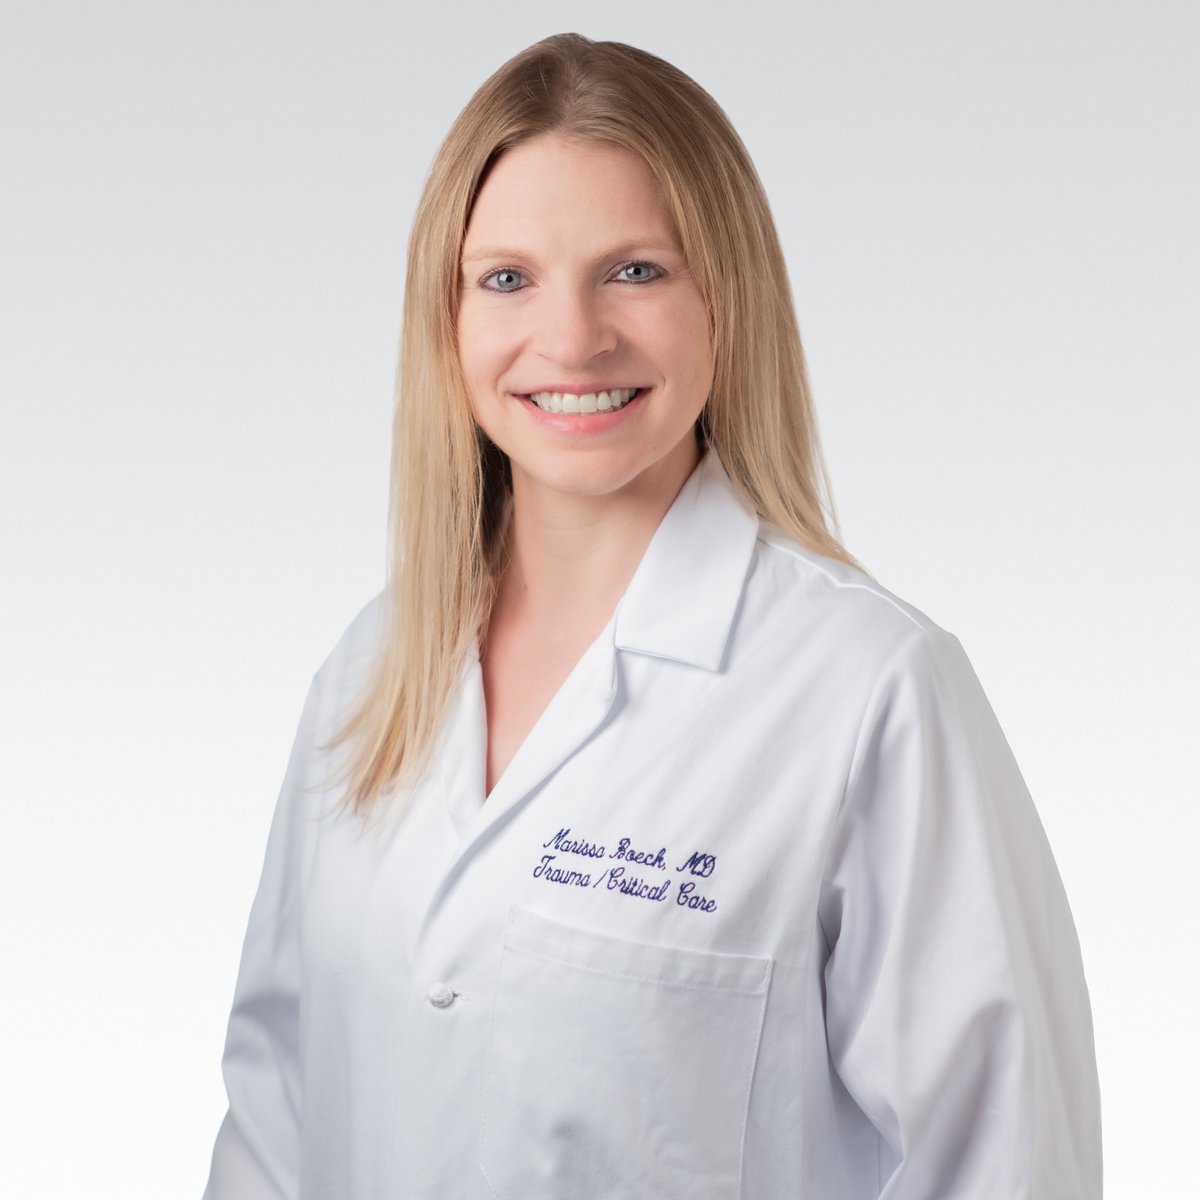 1⃣ of the American Association for the Surgery of Trauma $50,000 annual scholarships was awarded to Acute Care Surgeon Dr. Marissa Boeck @KickAsana for the proposed study, 'Identifying and Addressing Unmet Needs of Injury Survivors at a Safety Net Hospital in San Francisco.'🥳👏